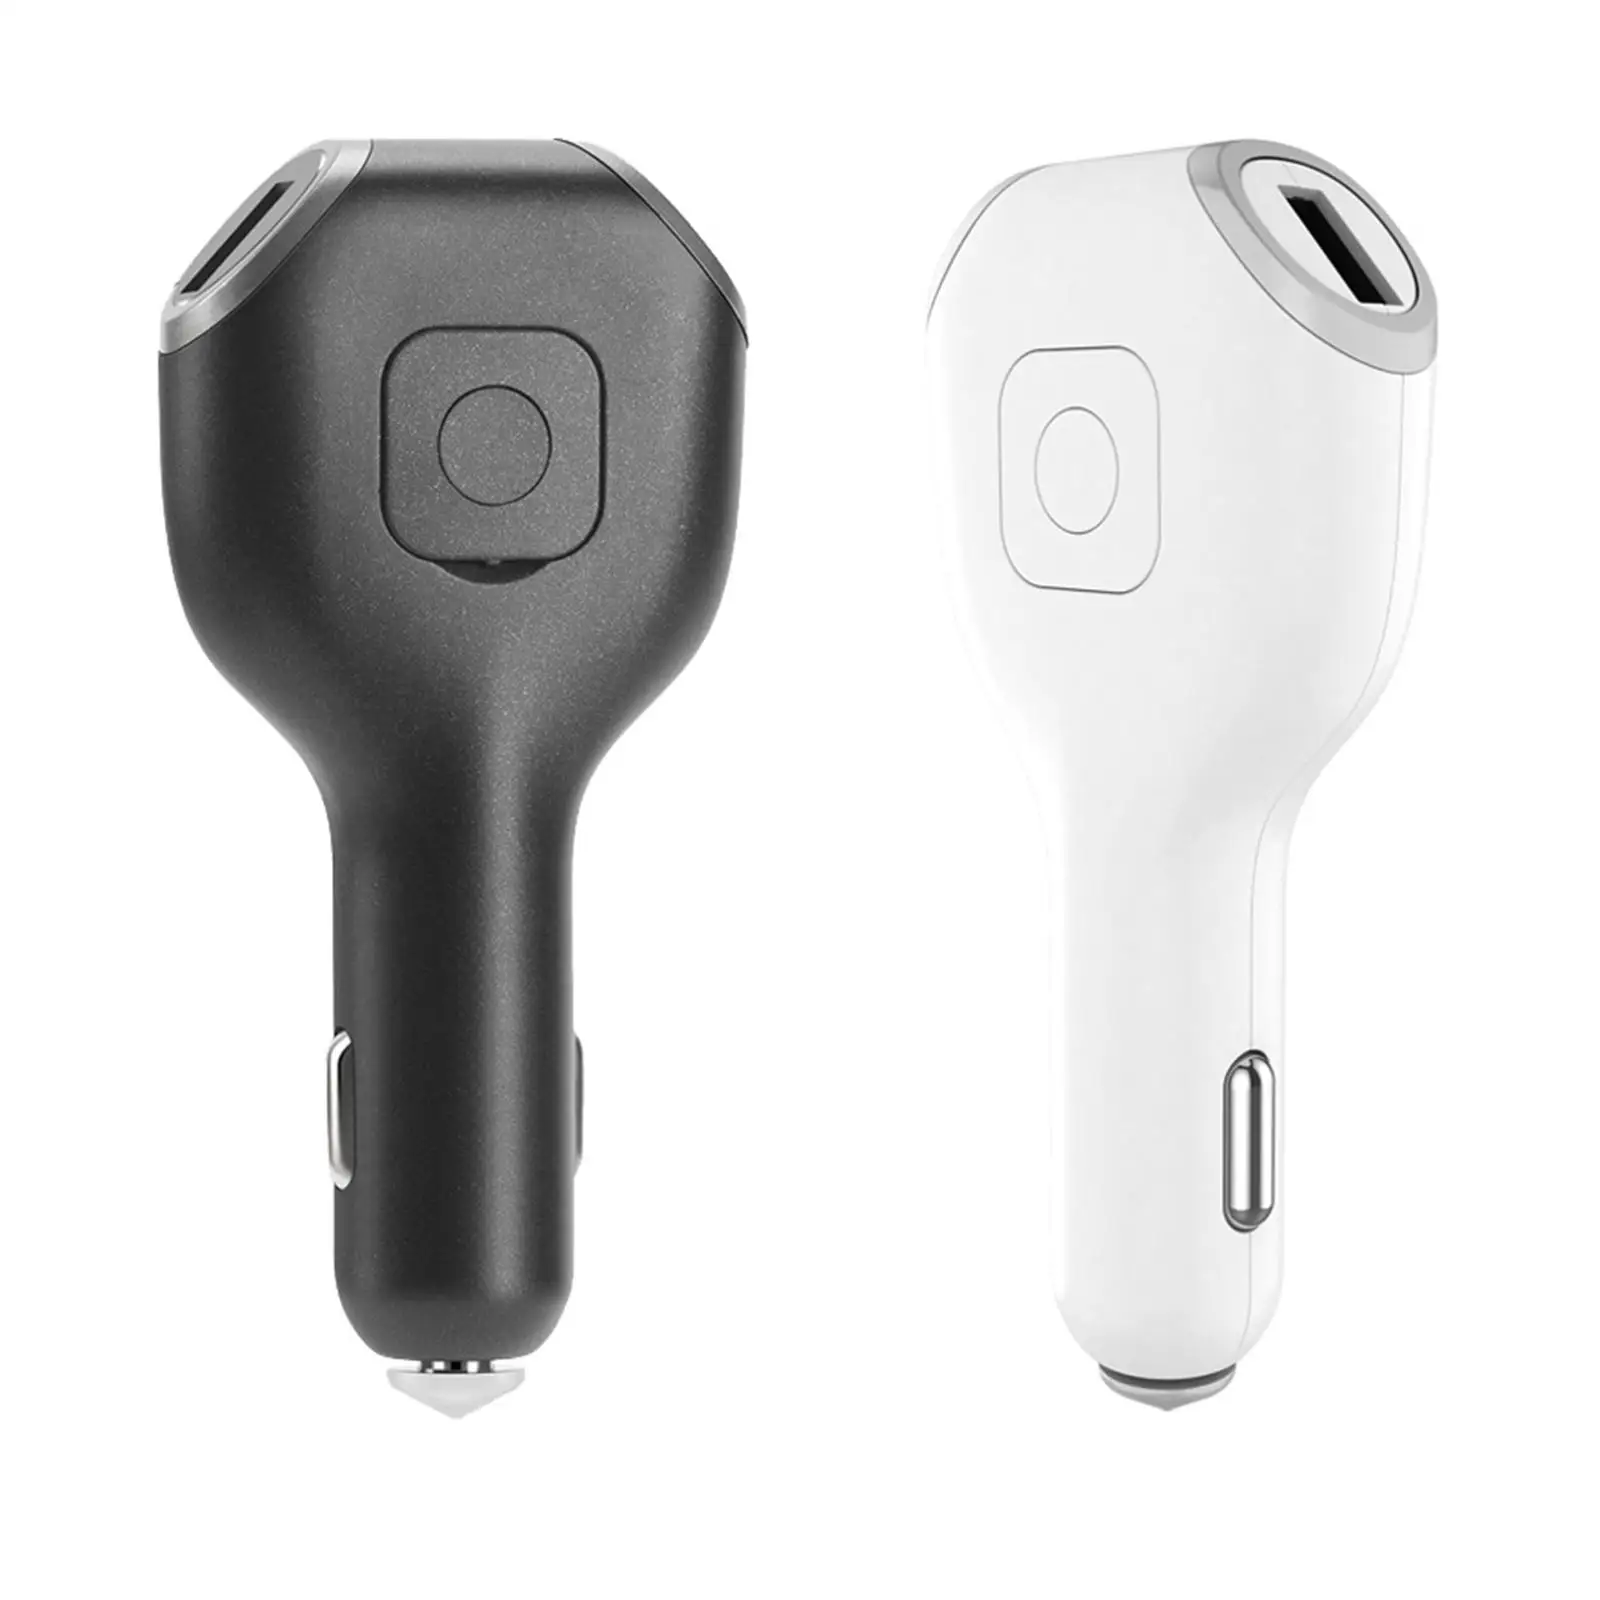 Multifunction Portable Car Charger Fast Car Charger Adapter for IOS Android